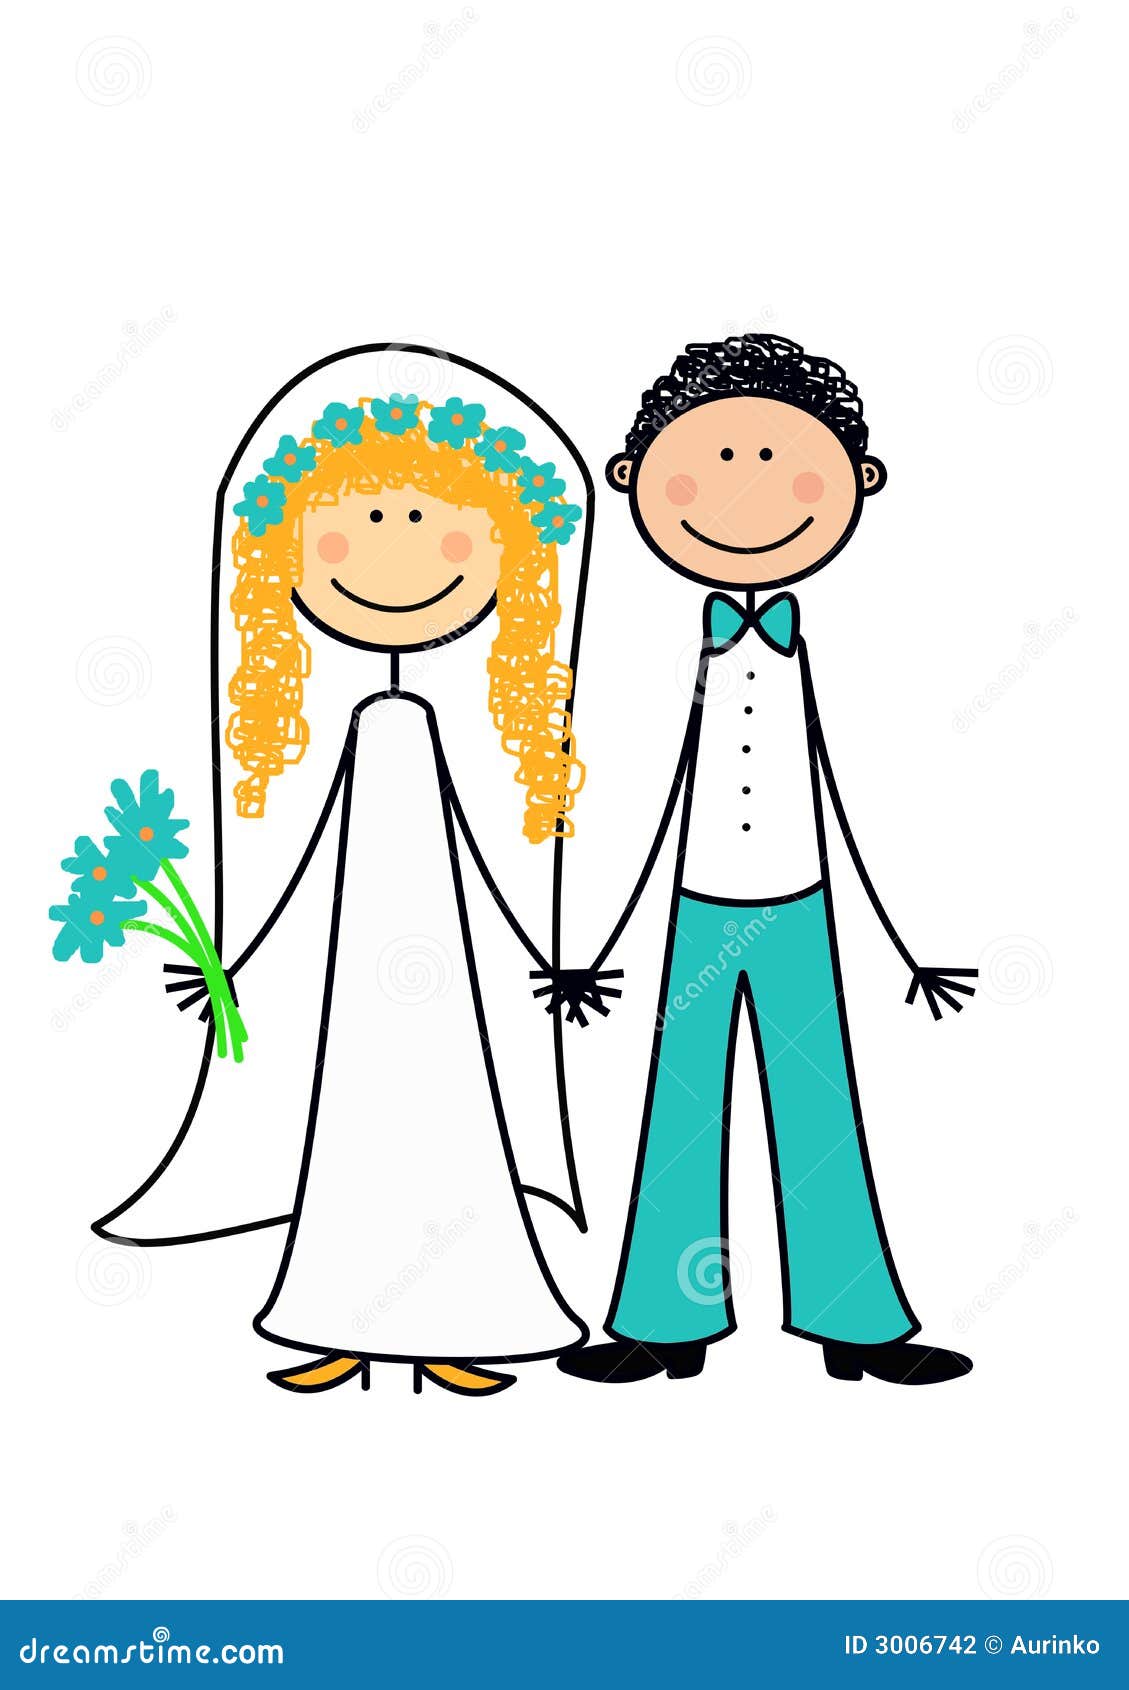 clipart of a happy couple - photo #16